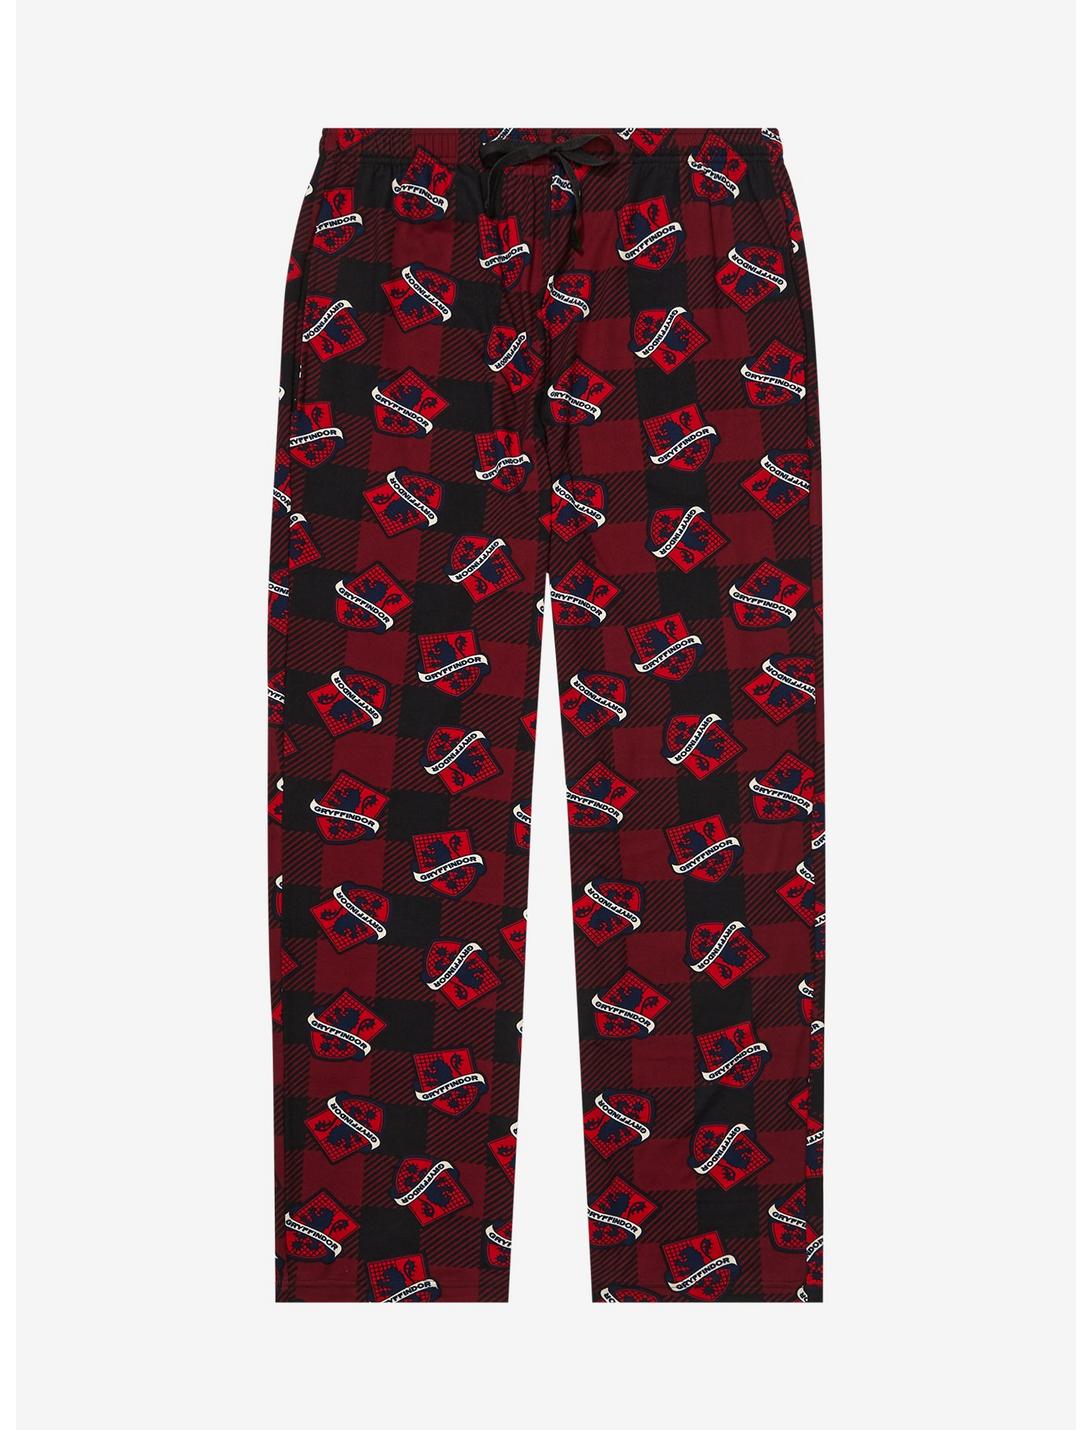 Harry Potter Plaid Gryffindor Allover Print Sleep Pants - BoxLunch Exclusive, RED, hi-res